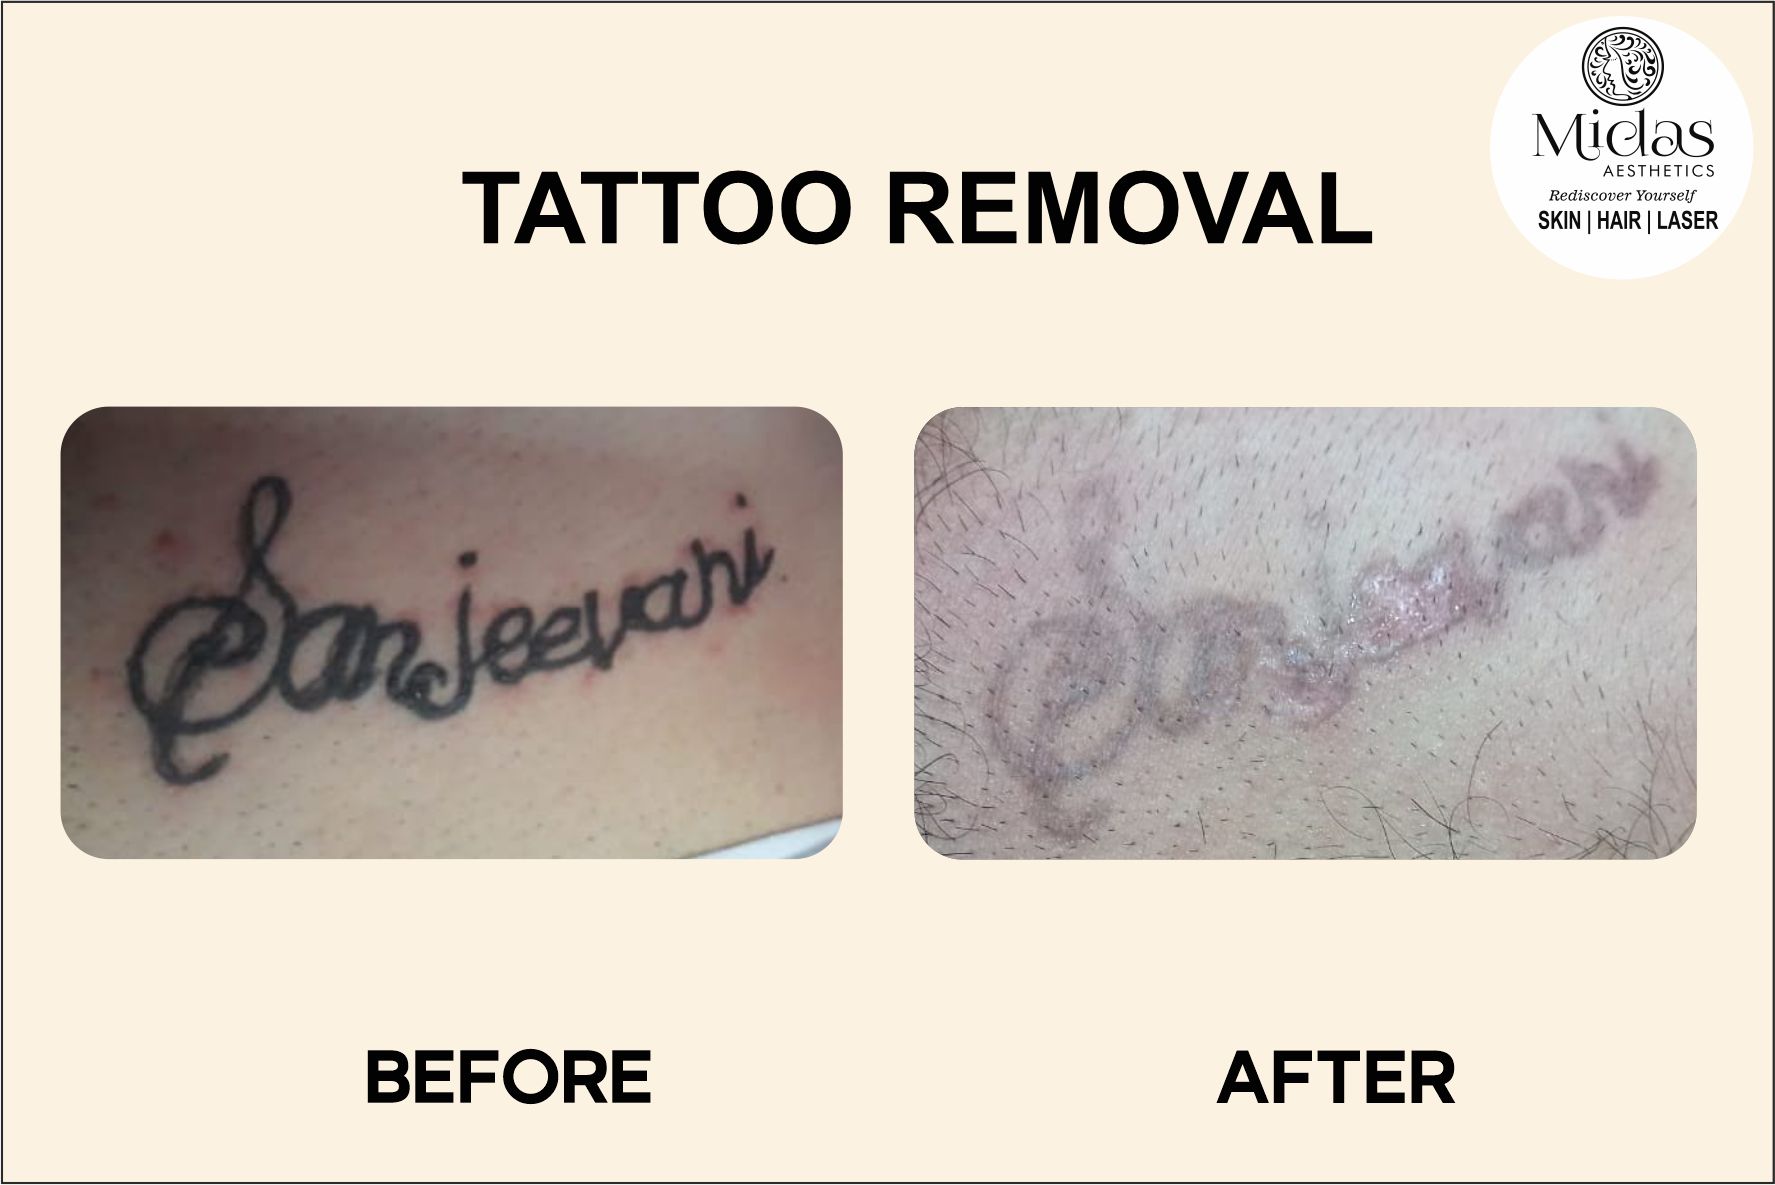 Tattoo Removal, before and after images